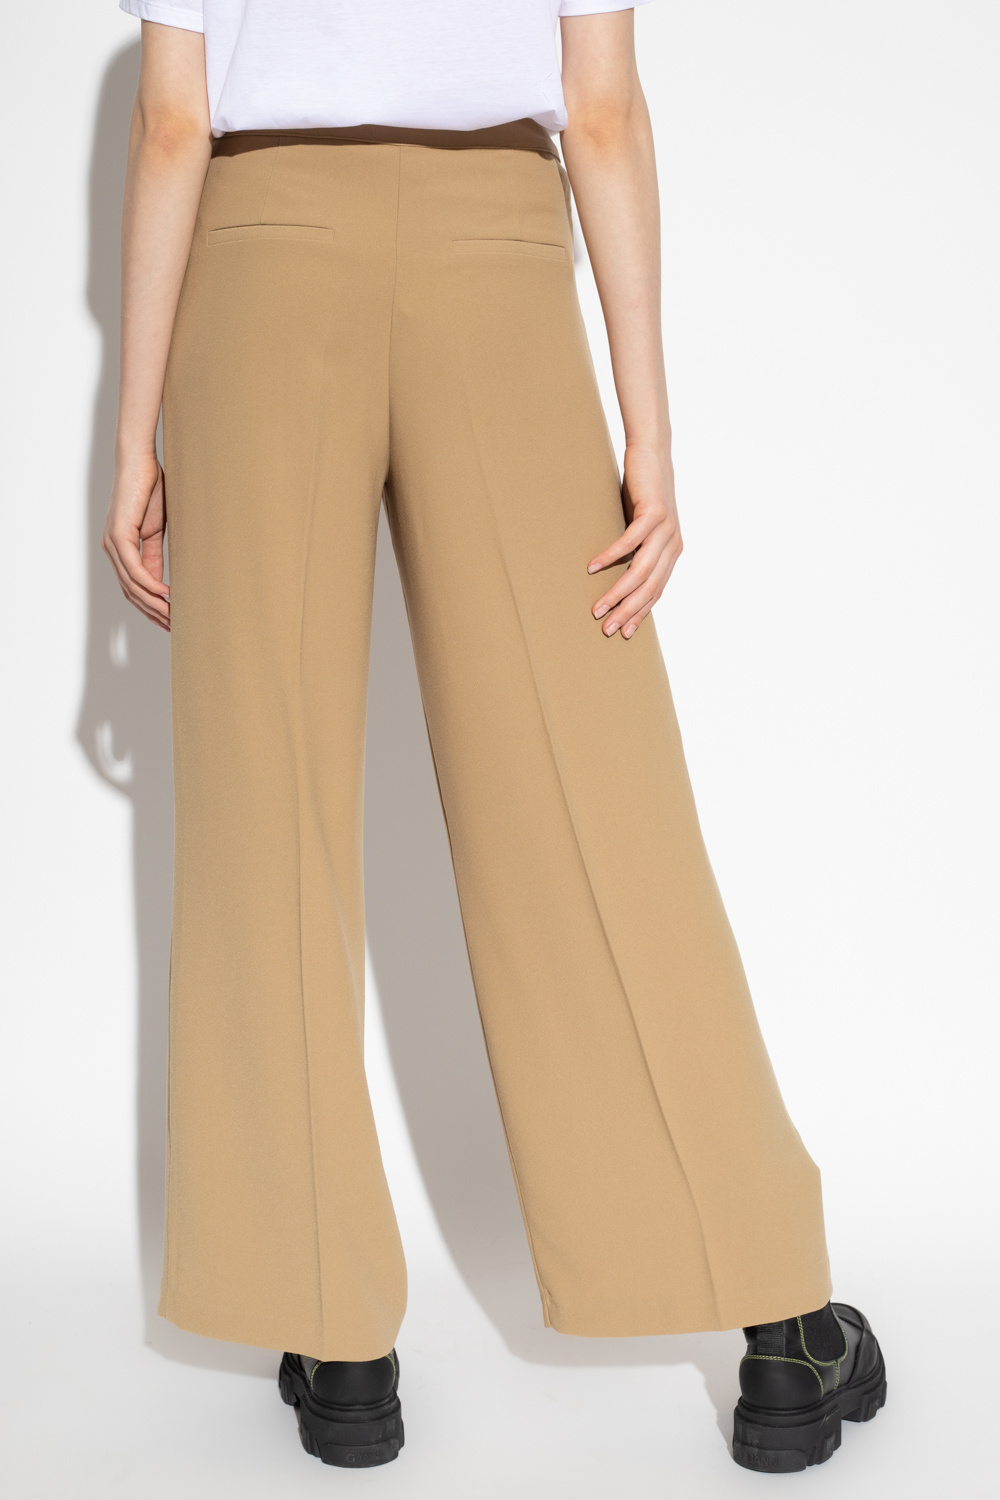 Notes Du Nord ‘Oliana’ Peaceful trousers